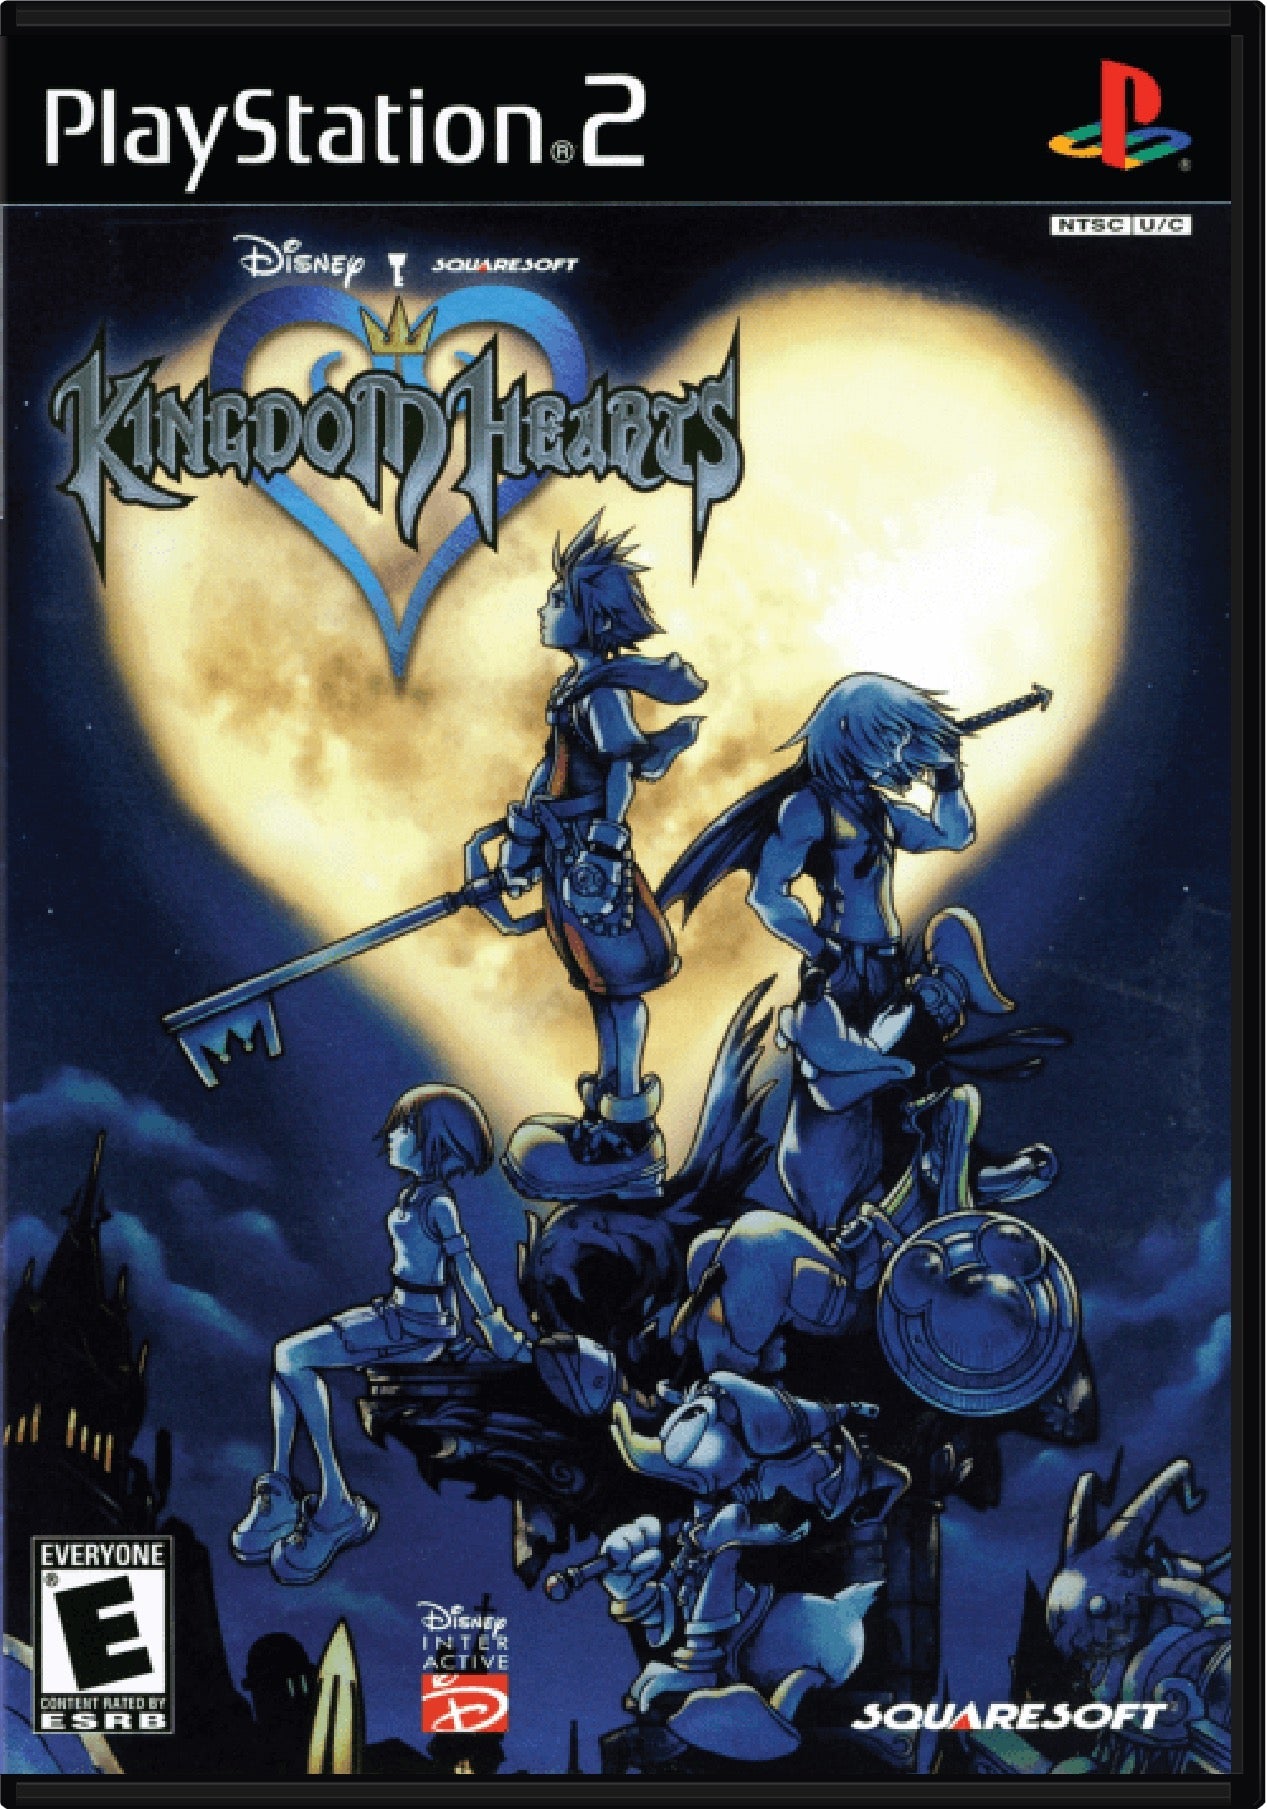 Kingdom Hearts Cover Art and Product Photo